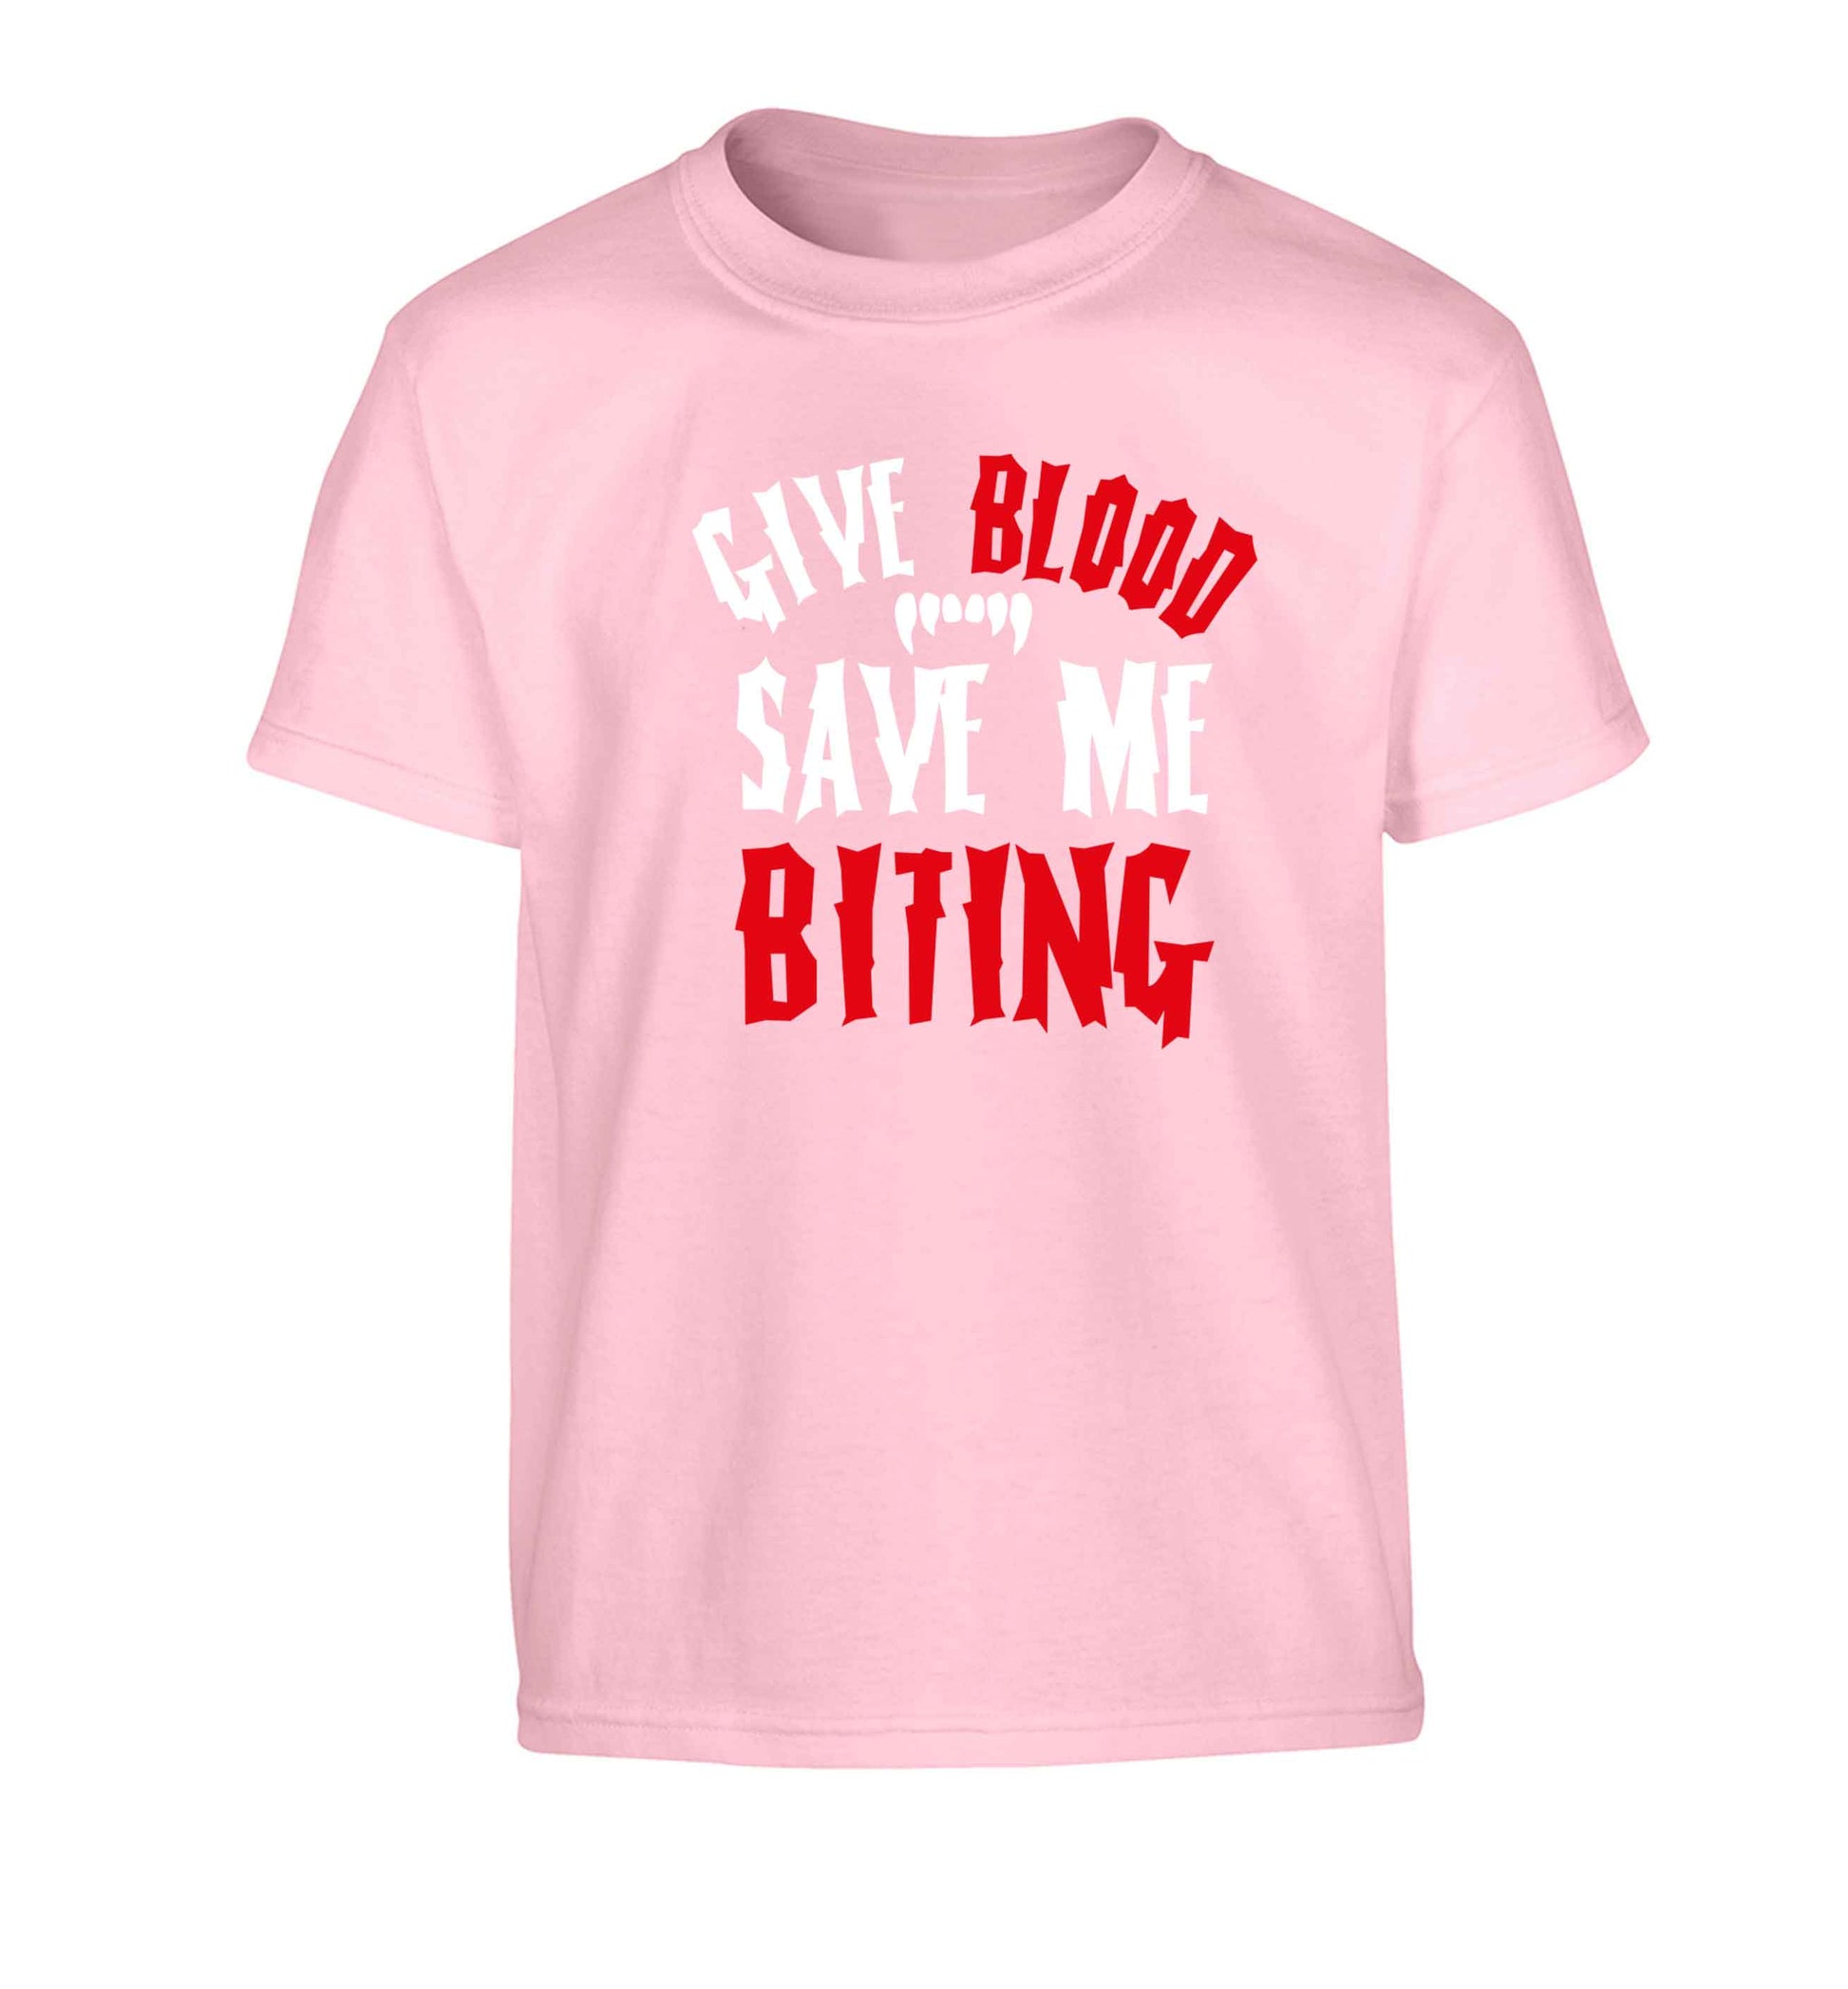 Give blood save me biting Children's light pink Tshirt 12-13 Years